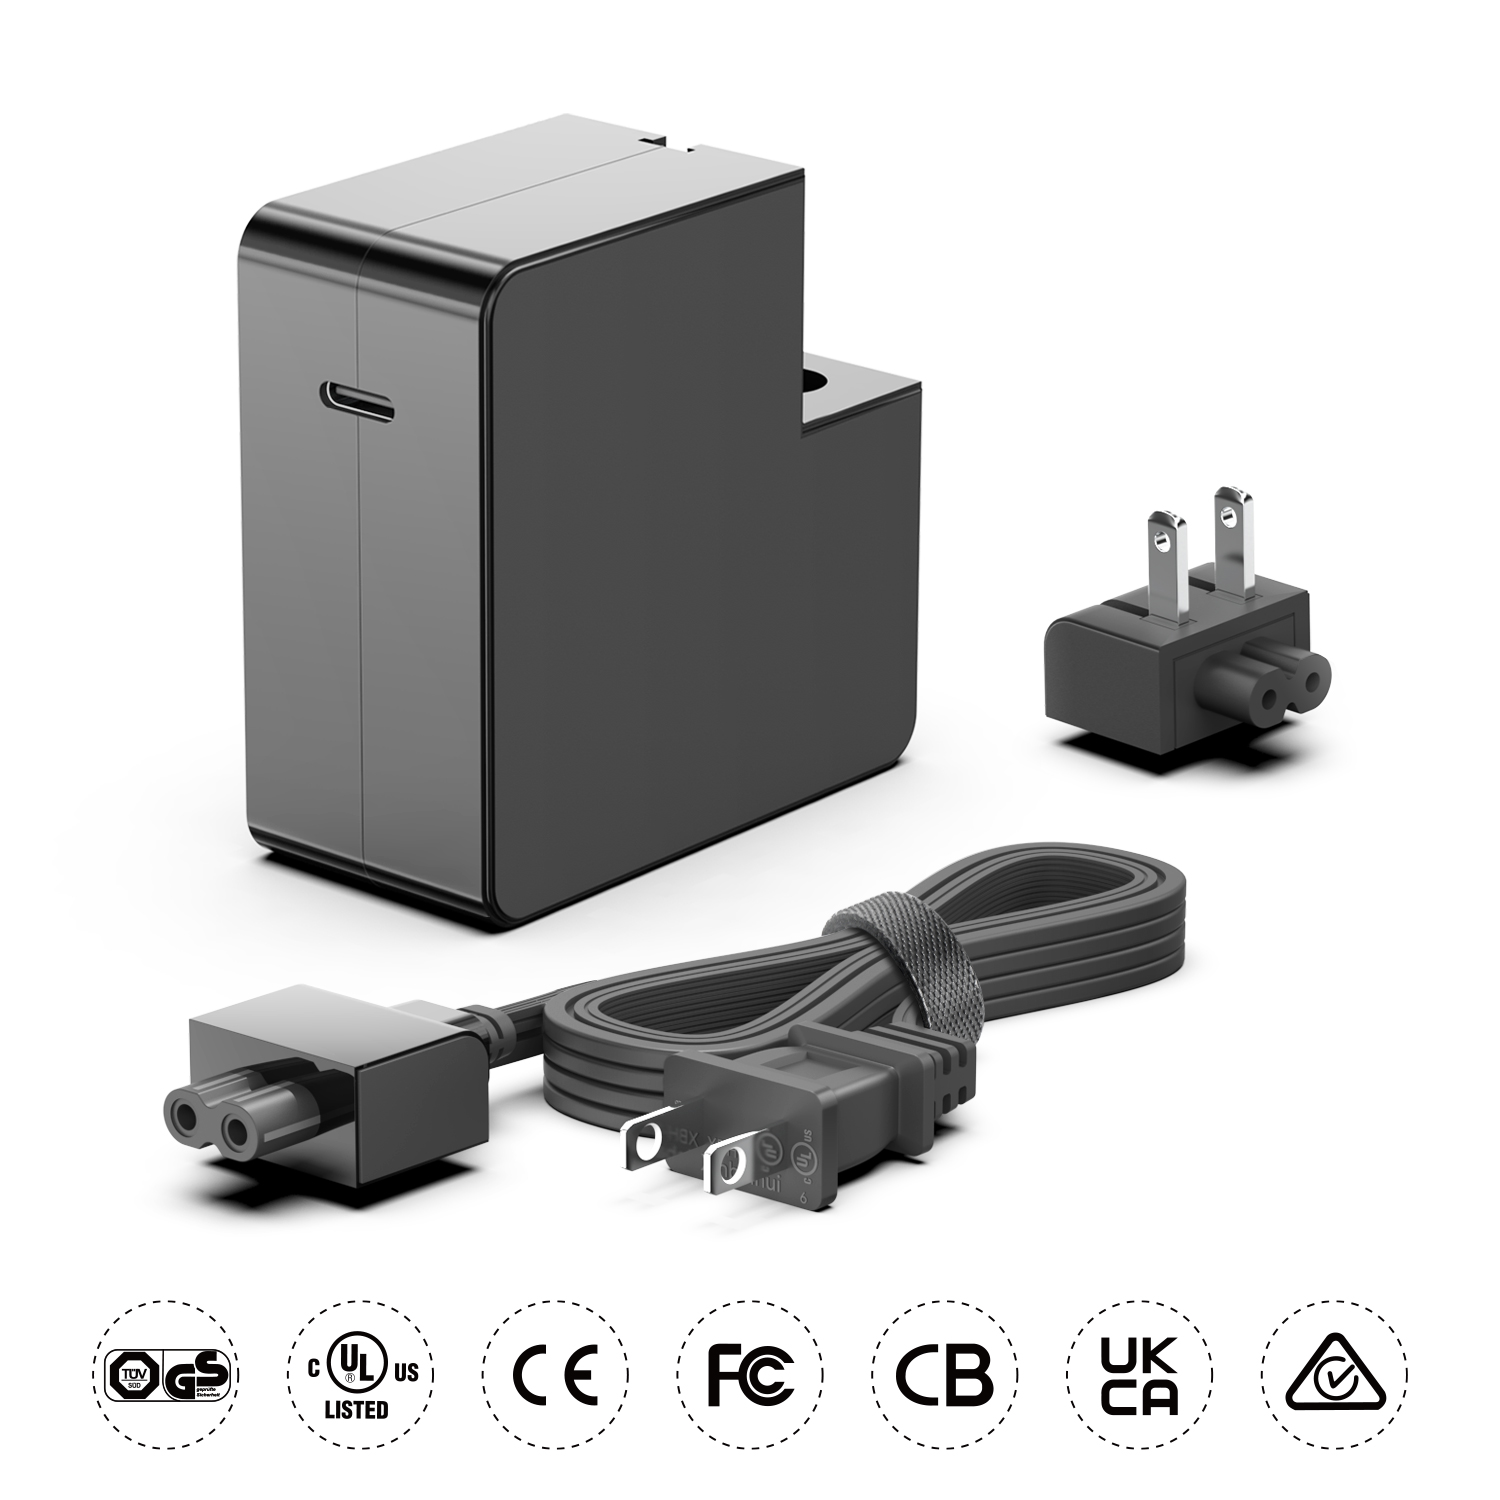 Detachable 140W USB C PD Power Adapter with Interchangeabl Plugs